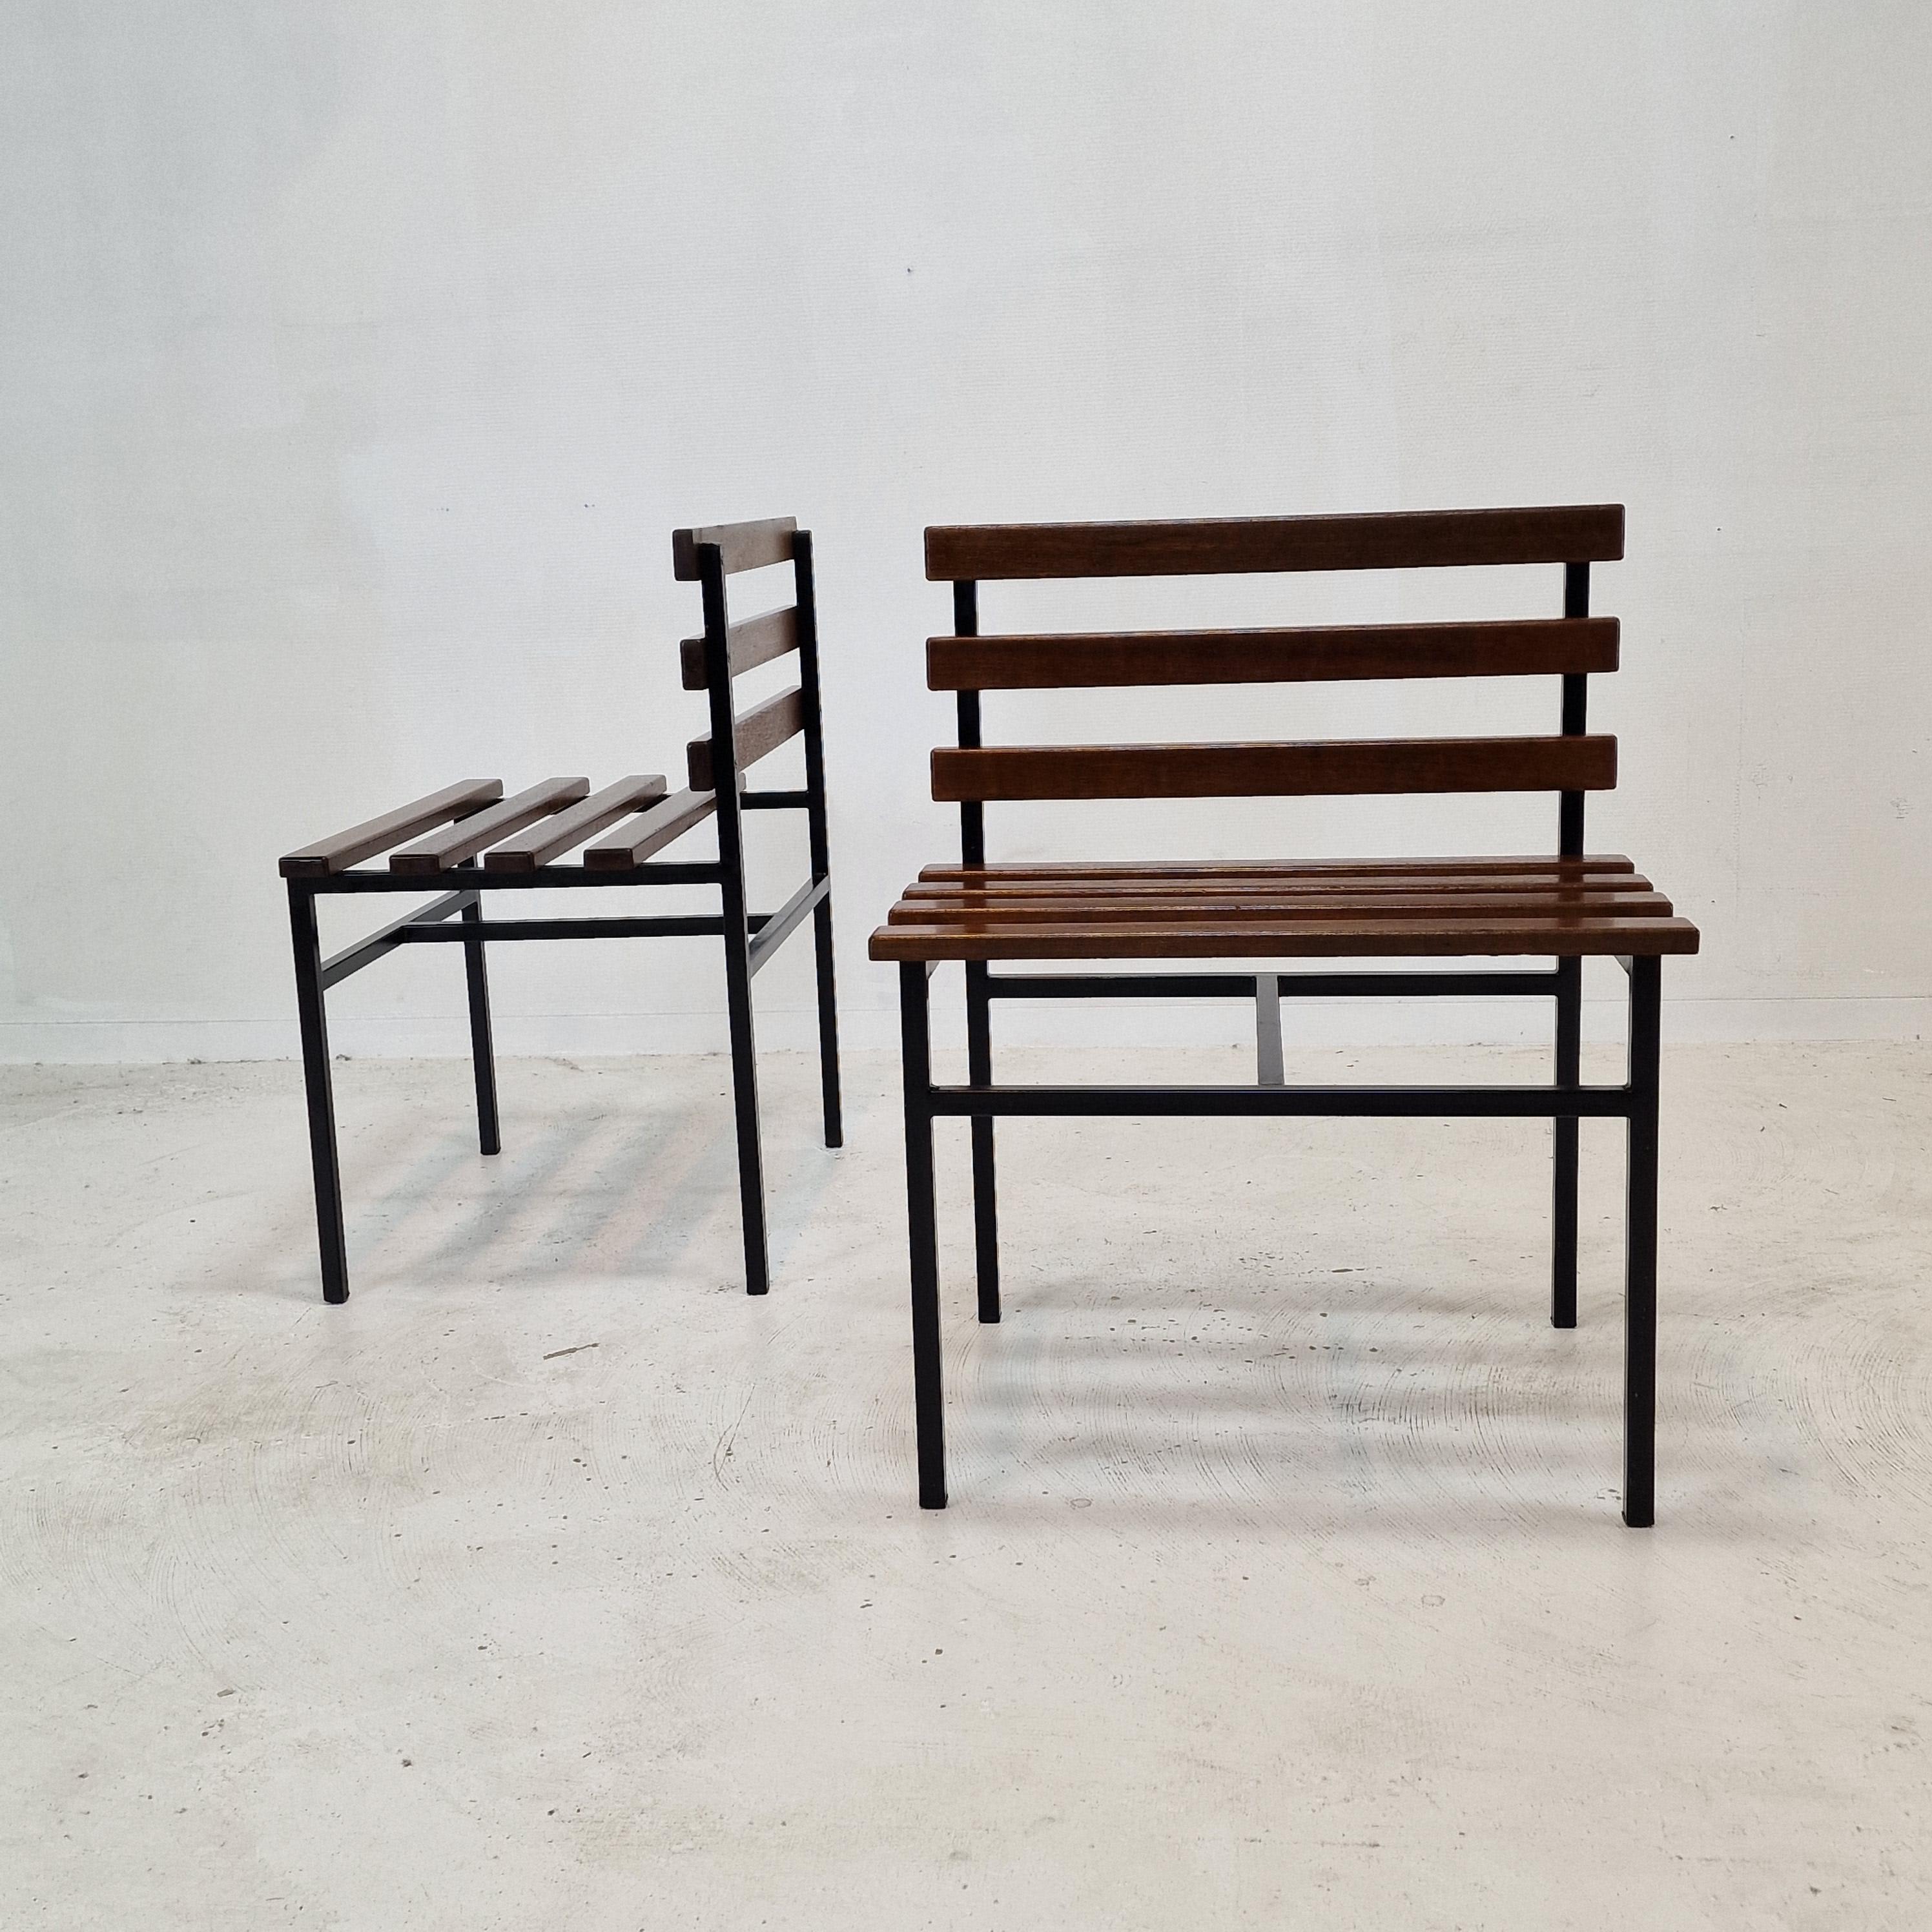 Midcentury Set of 2 Chairs or Benches in Teak, Italy, 1960s For Sale 2